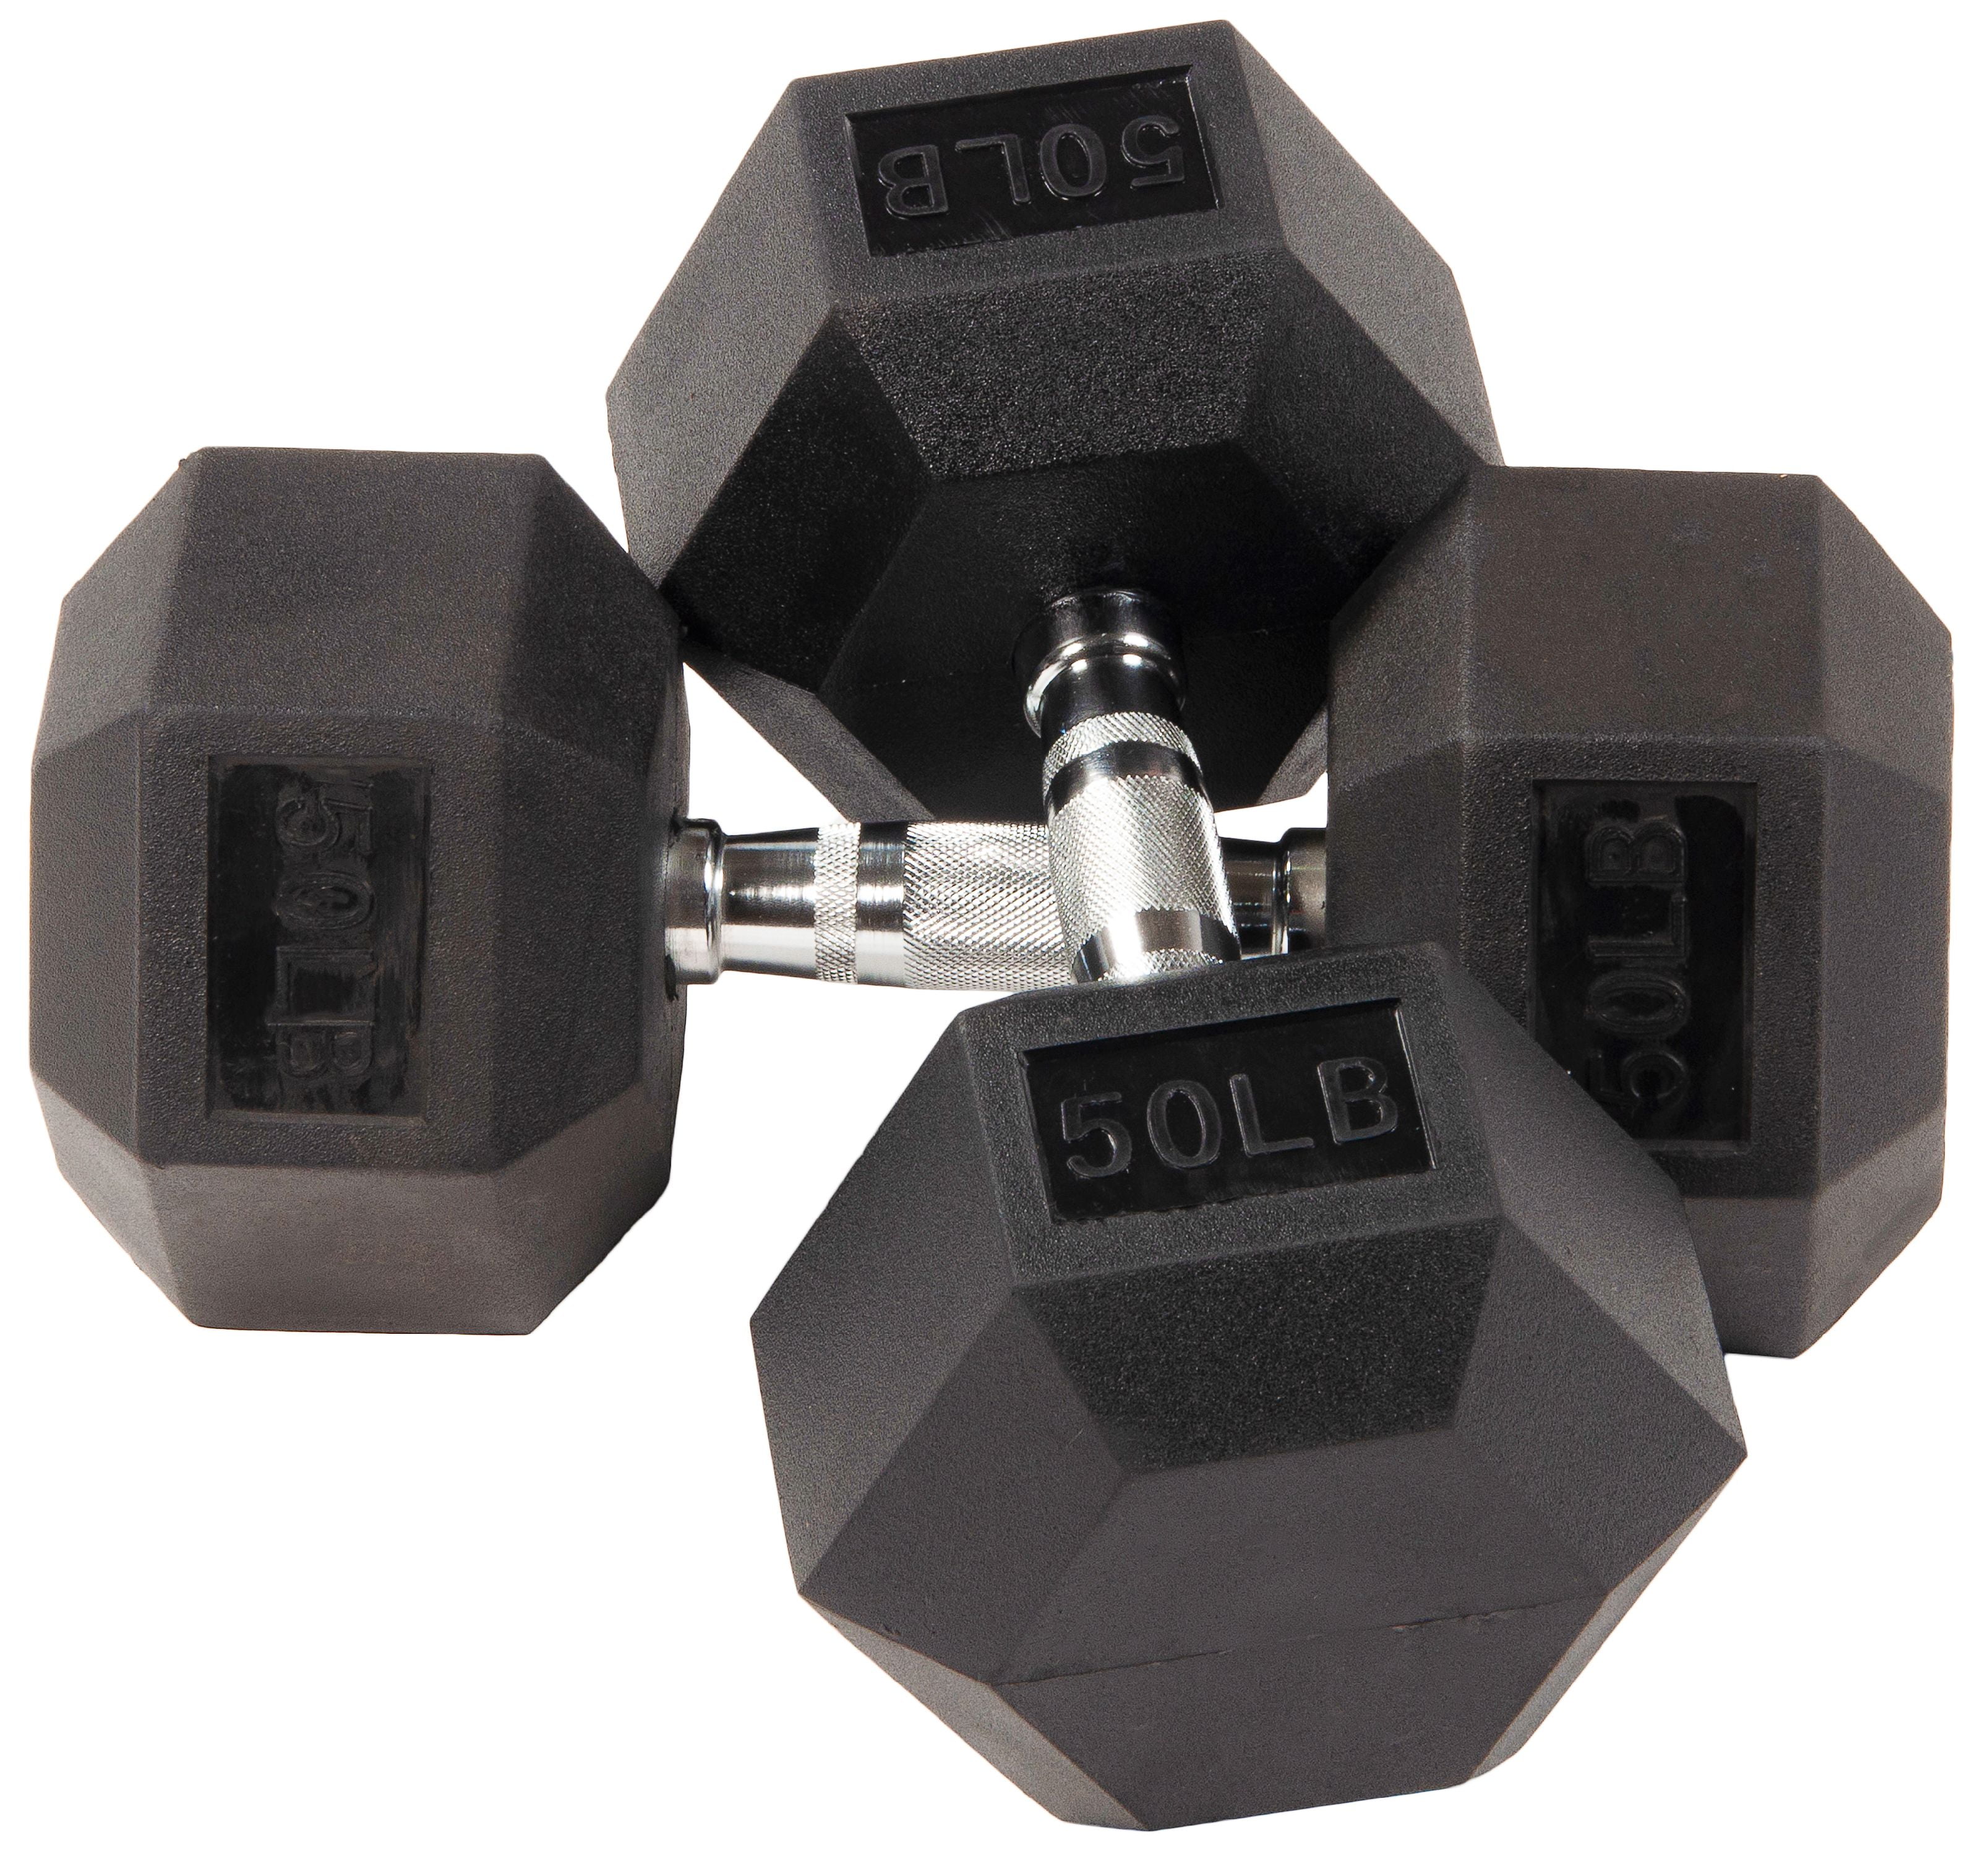 30 lb 10 lbs 50 lb CAP FREE SHIPPING 20 lbs Details about   Set Of 2 Rubber Dumbbells 5 lbs 